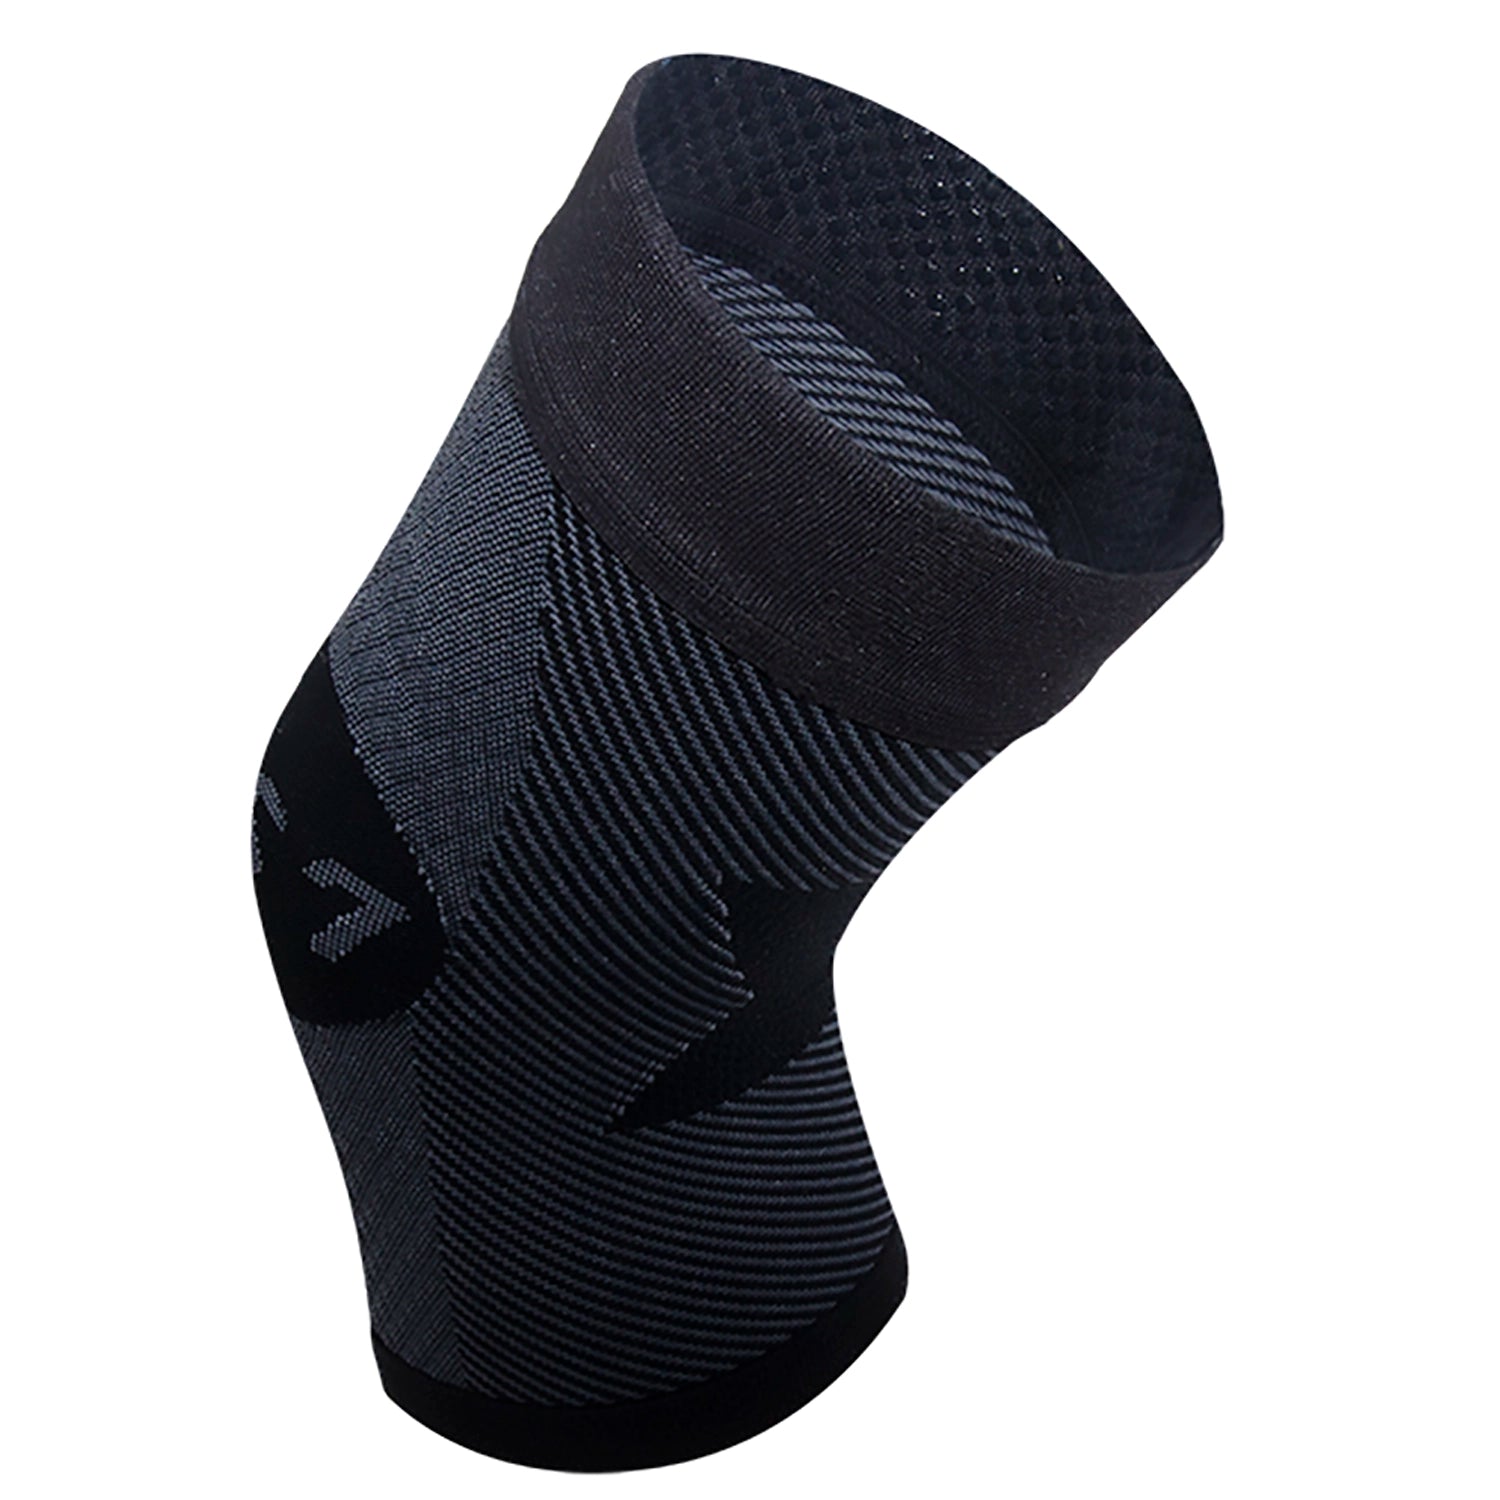 How to Wear the Orthosleeve KS7 Knee Compression Sleeve - Oh My